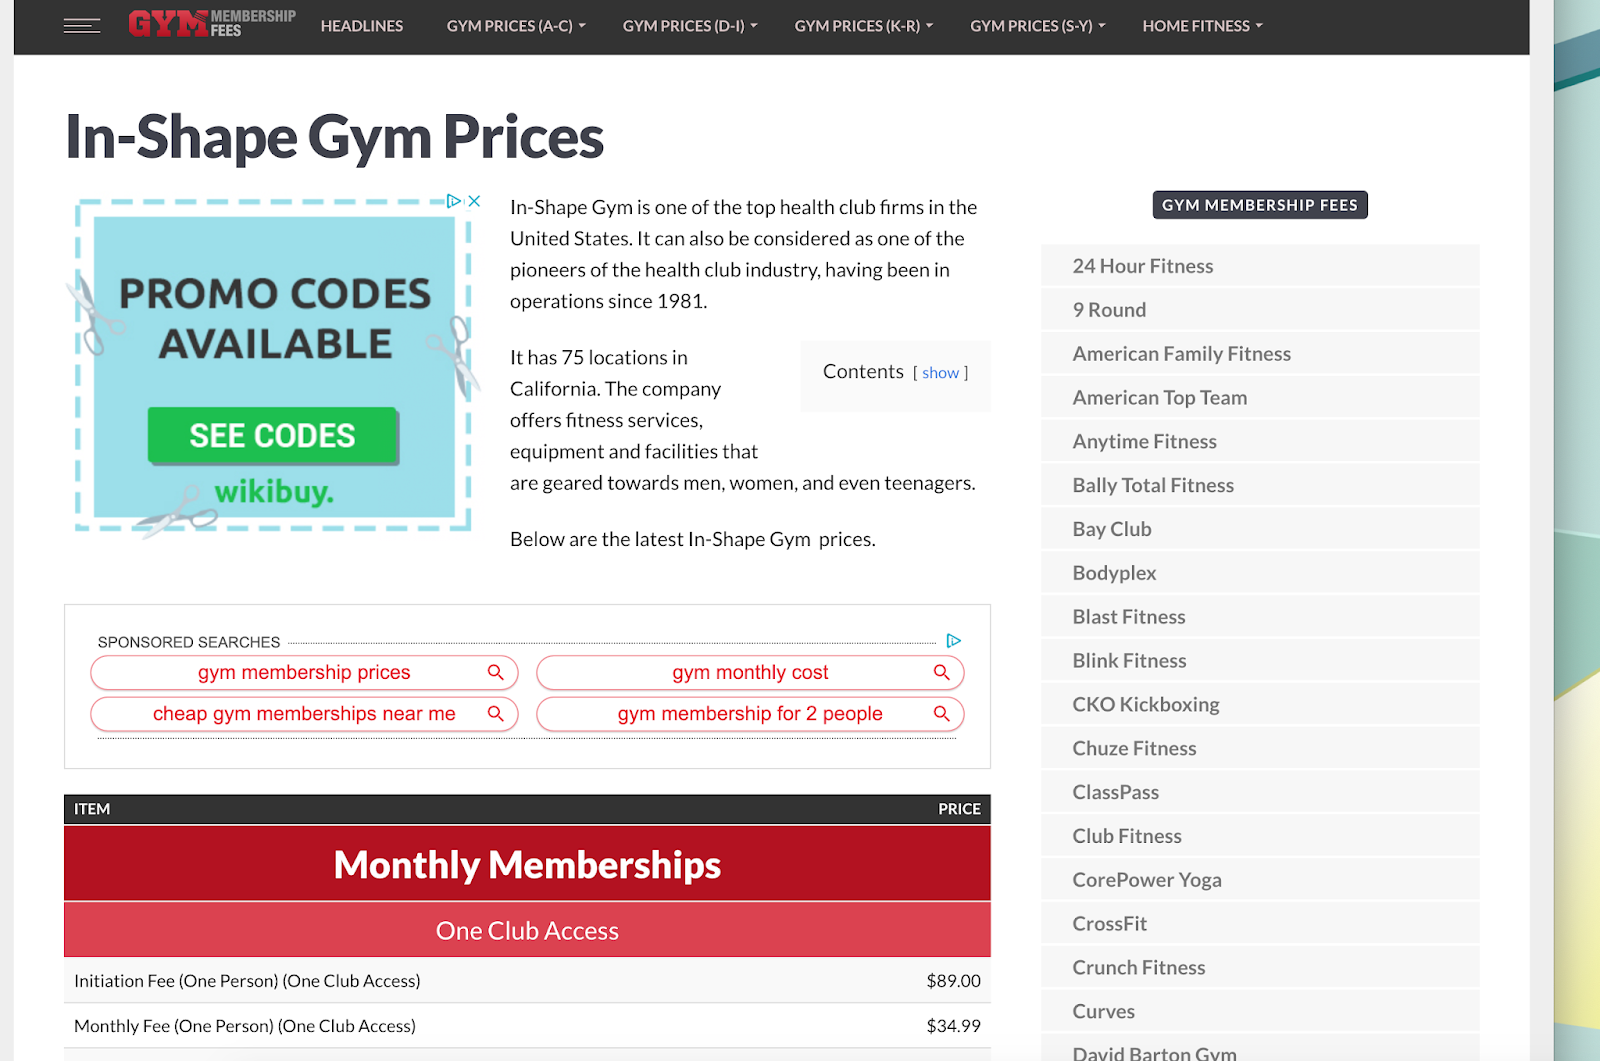 In-Shape Gym Prices